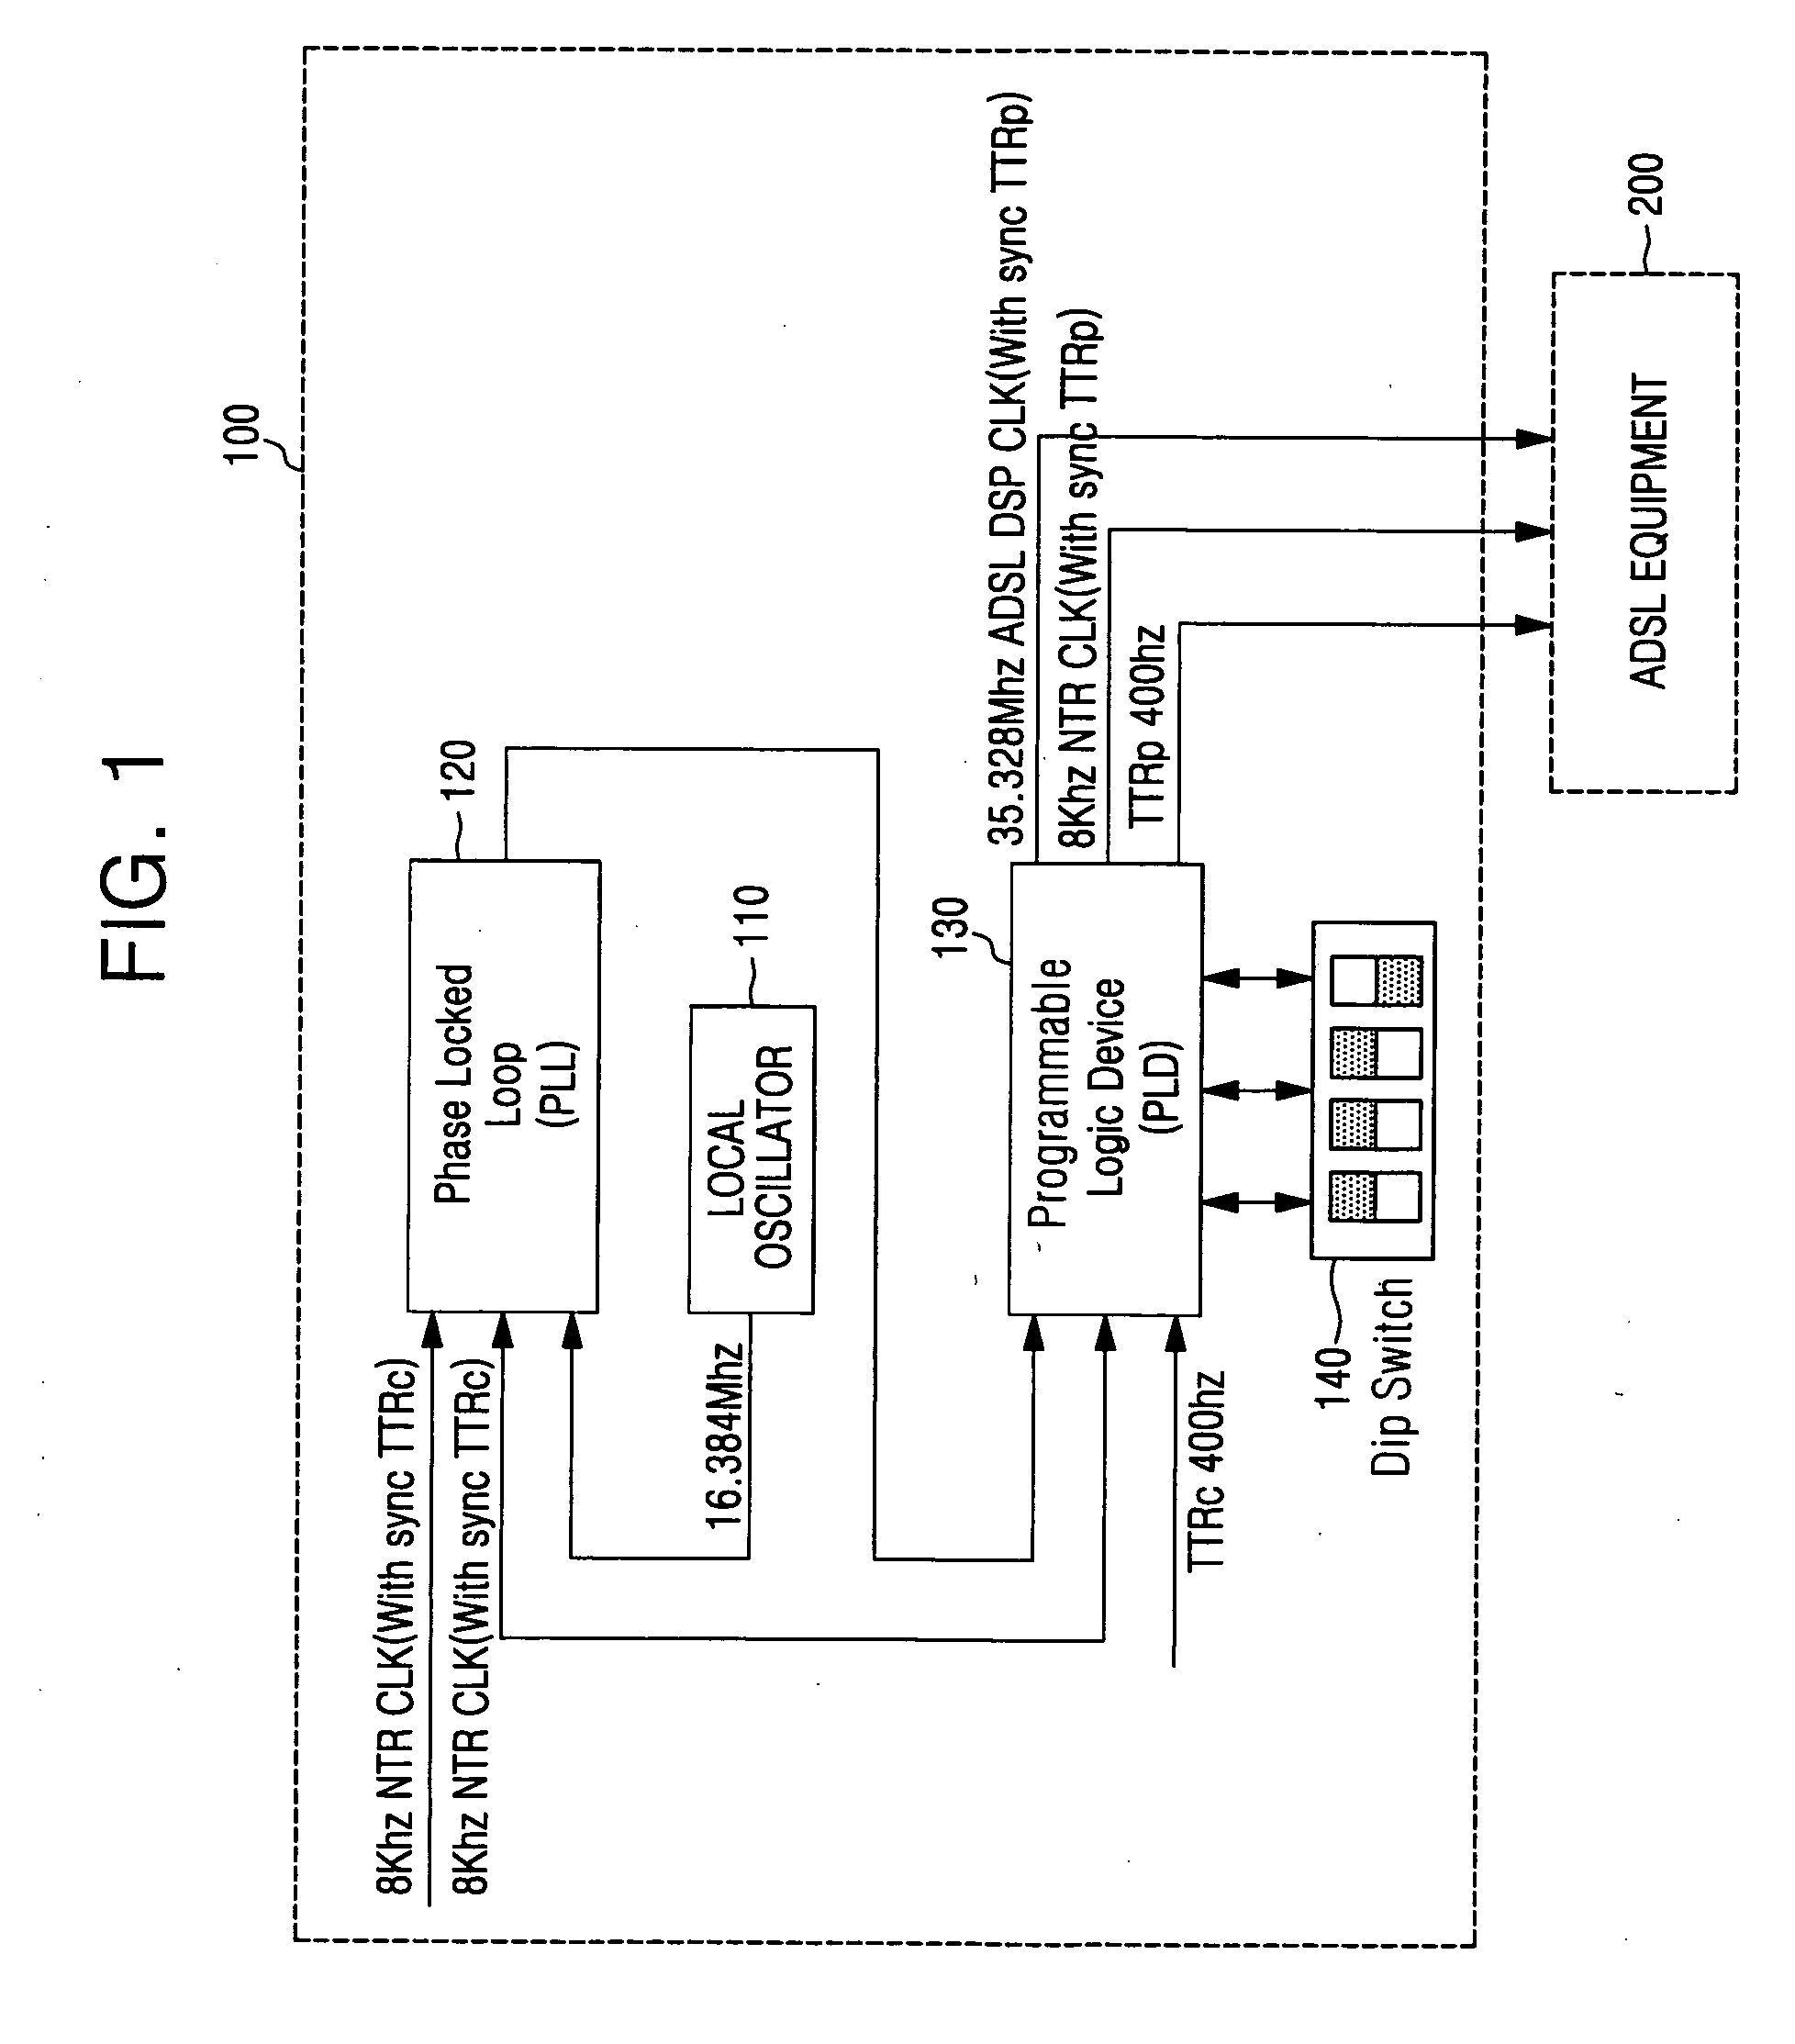 TTR offset control apparatus and method in asymmetric digital subscriber line